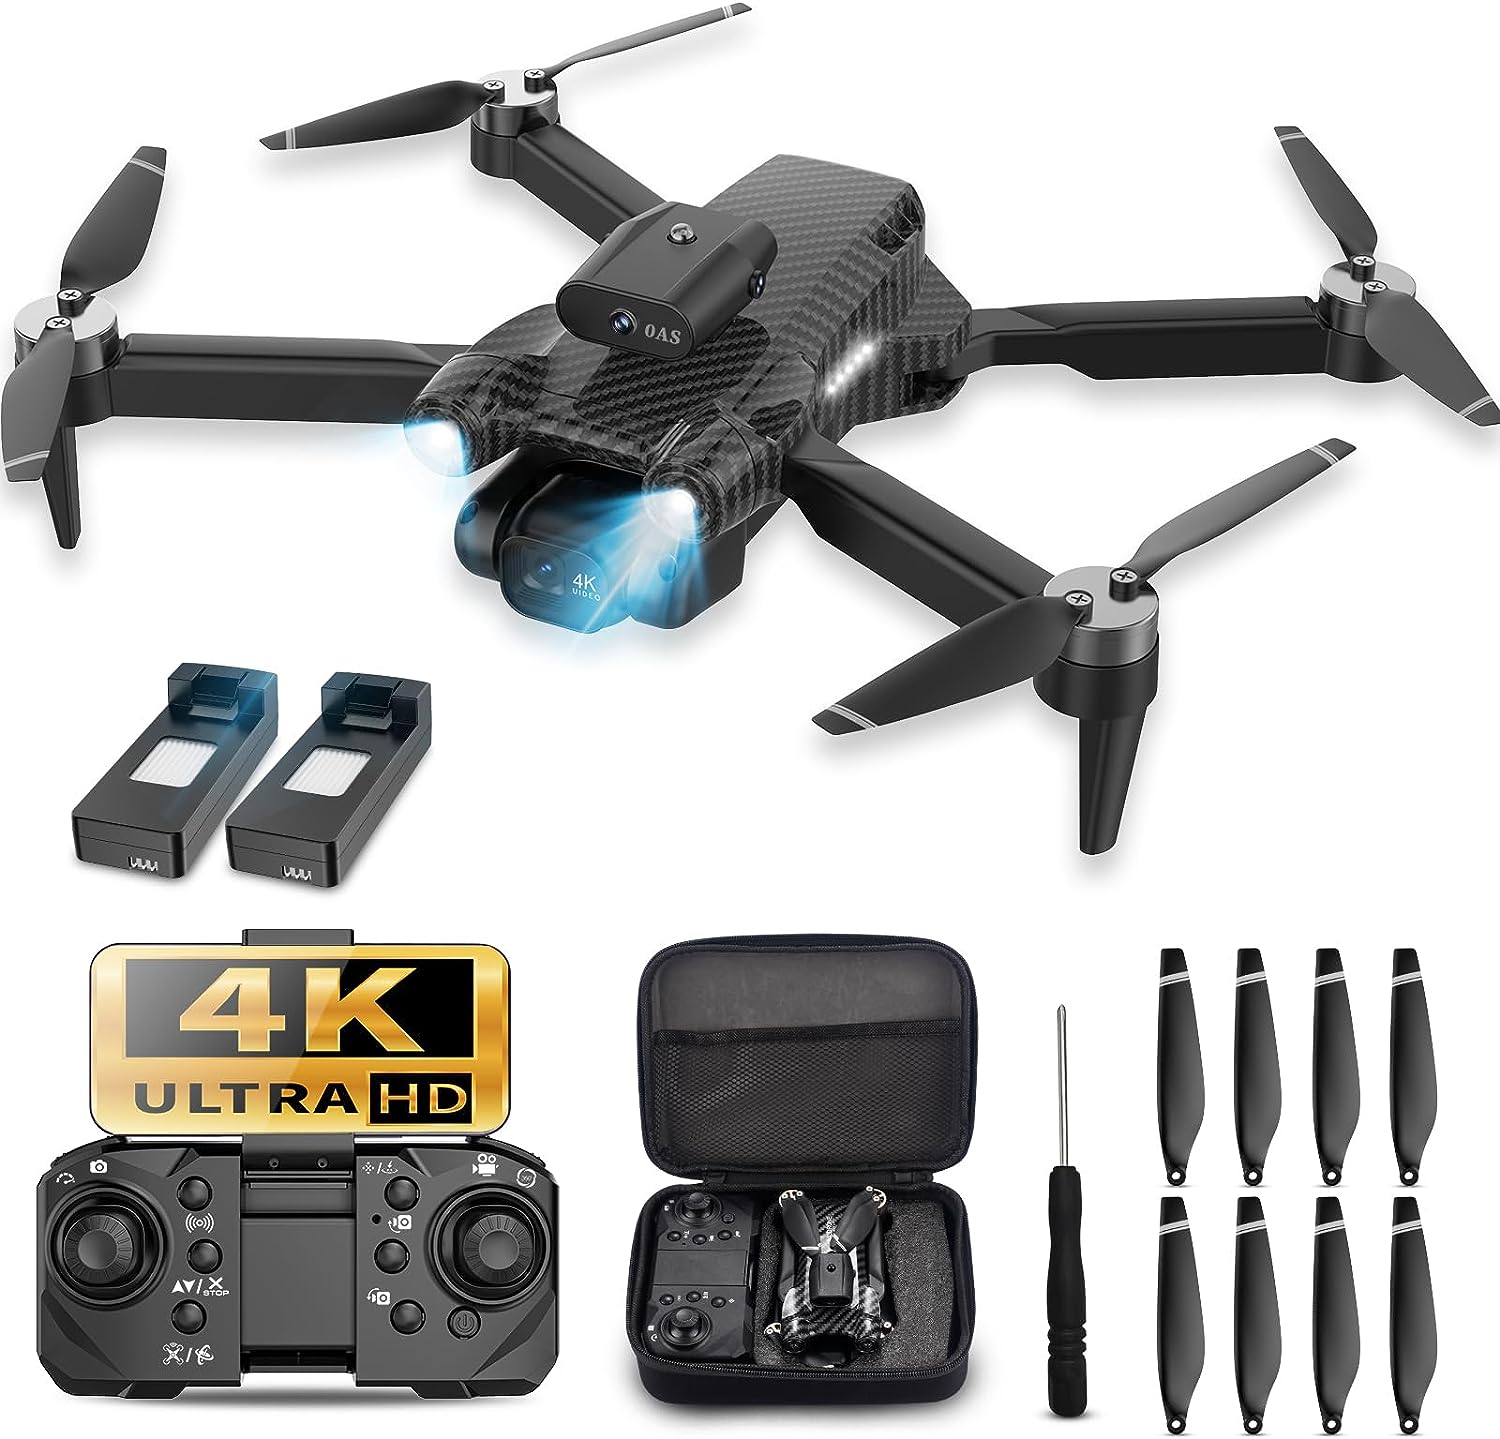 Mini drone Toy with camera: 4K HD FPV Mini Drone Toy – Foldable, Carrying Case, 90° Adjustable Lens, One Key Take Off/Land, Altitude Hold, 360° Flip, 2 Batteries, Obstacle Avoidance, Hovering Protection